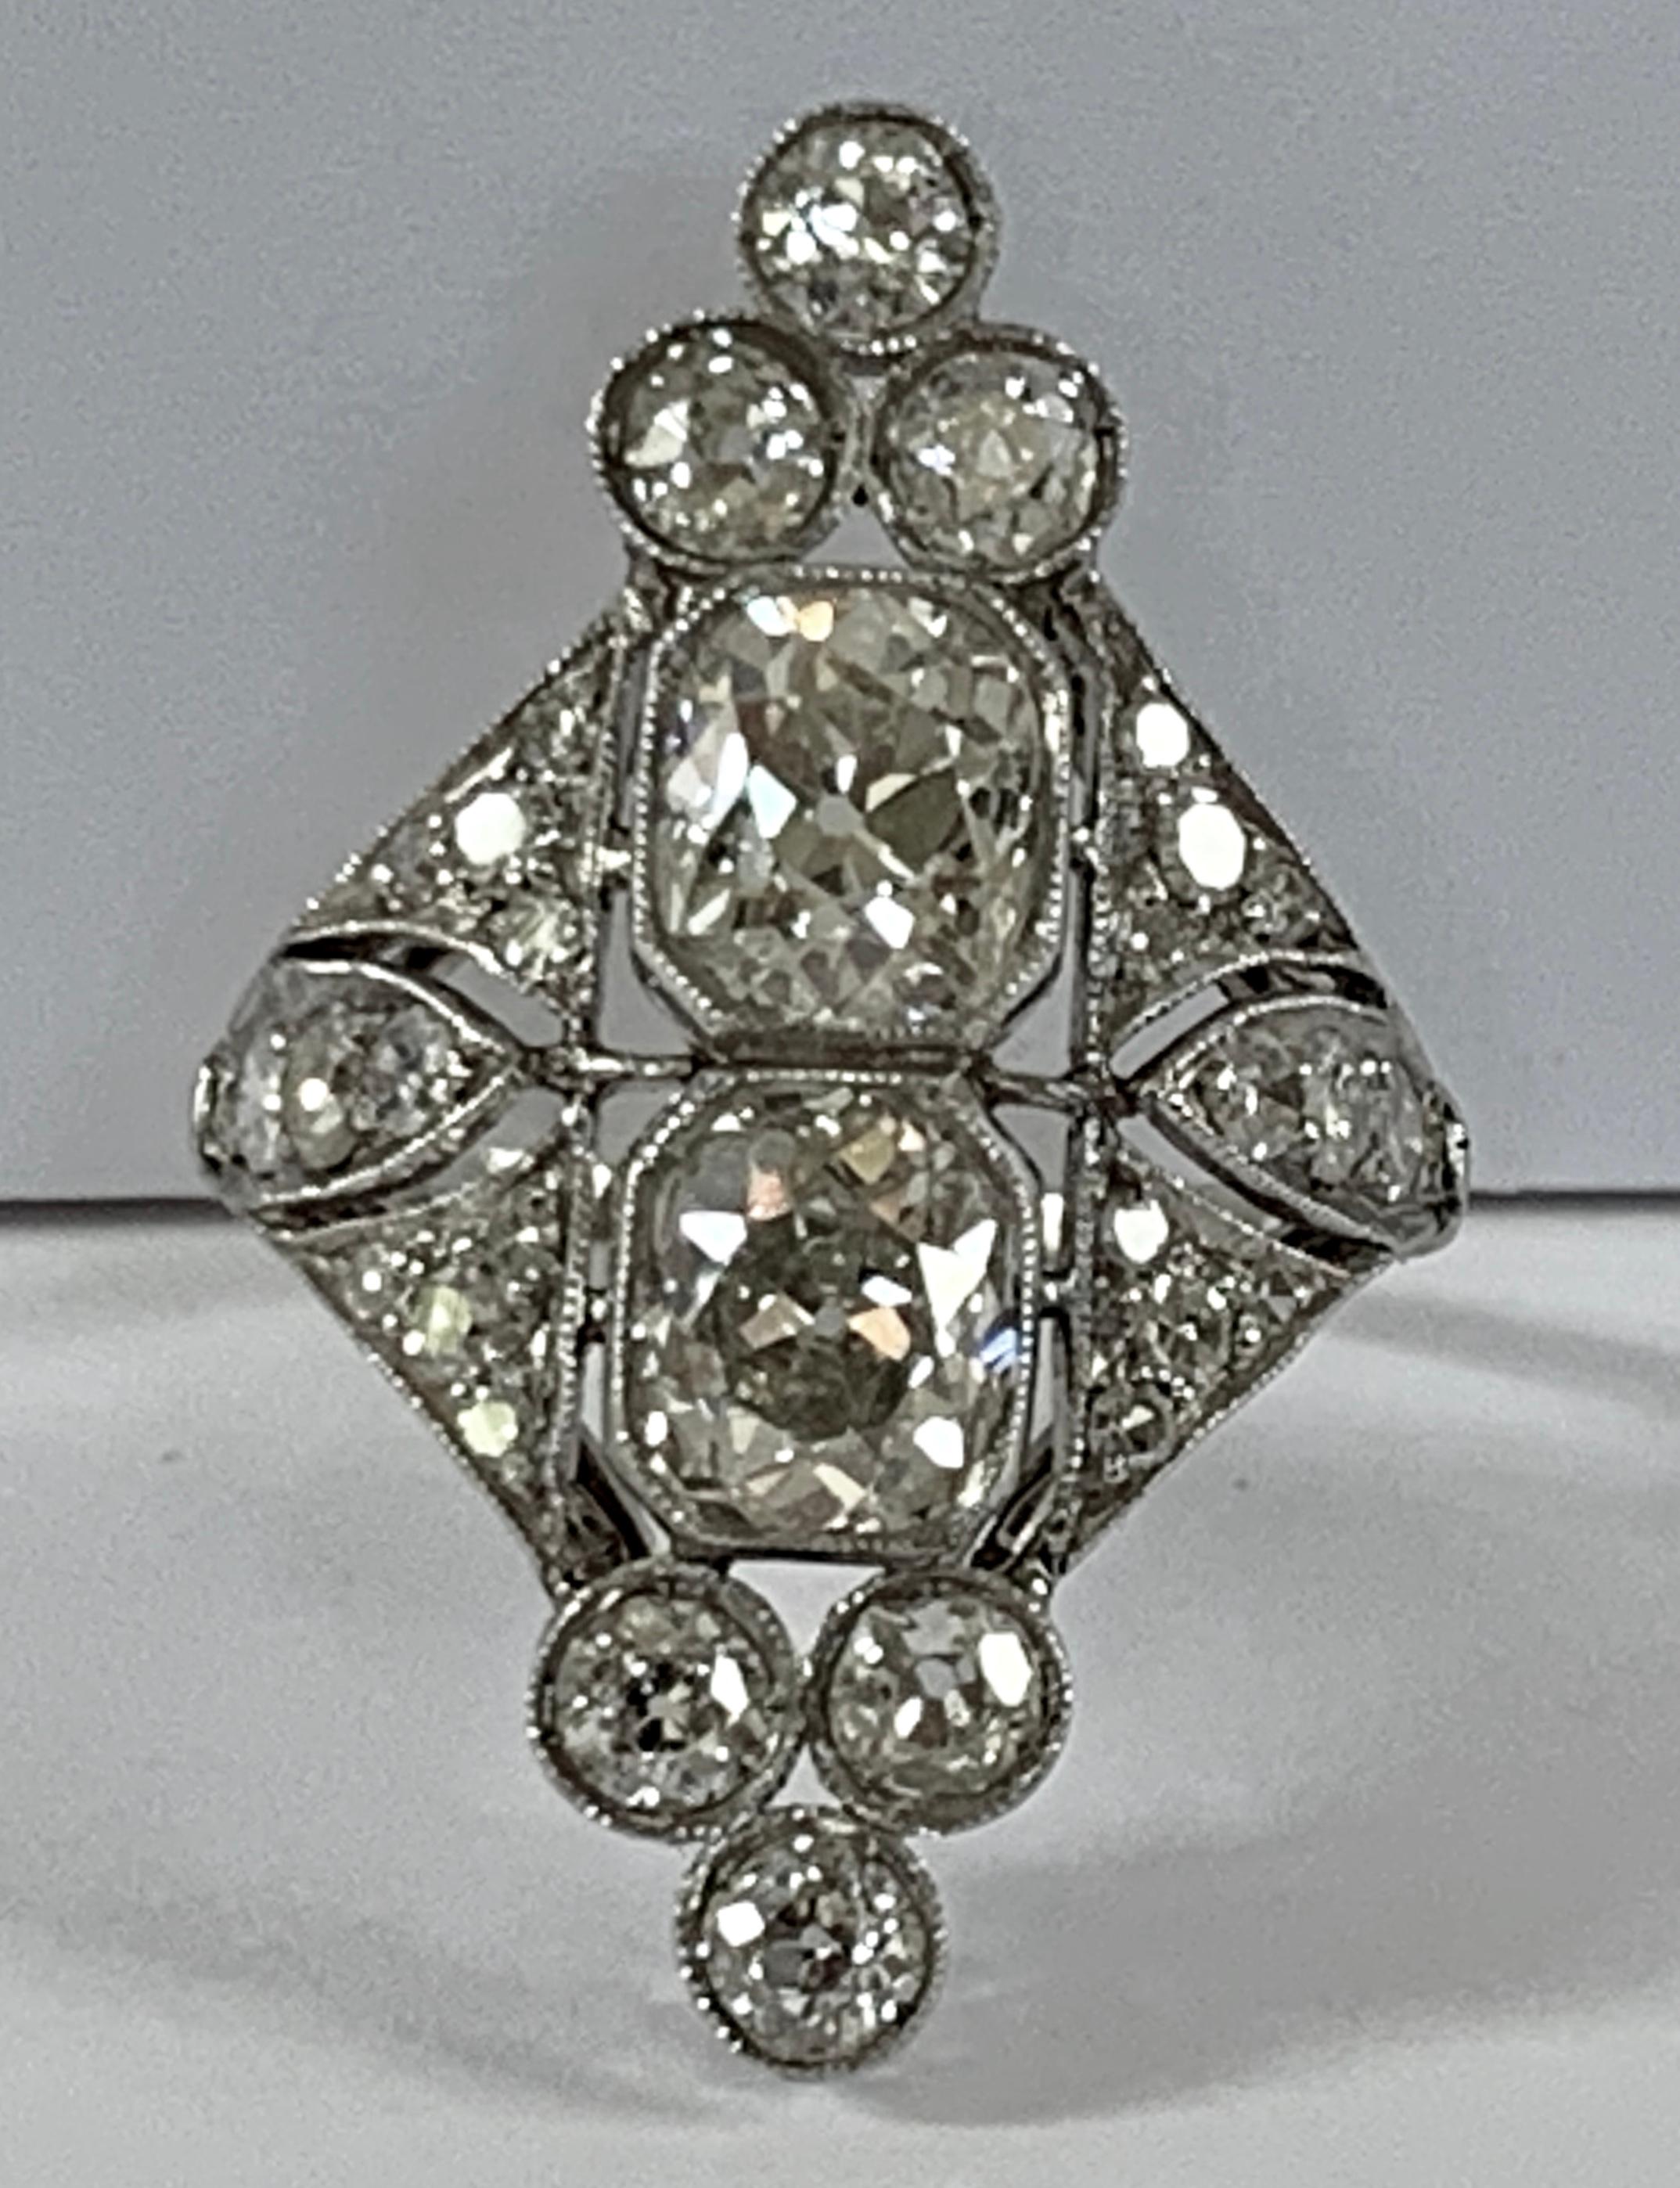 Stunning Art Deco ring showcases two nearly identical Old European cut tinted diamonds of circa 3.20 ct.  
The diamonds rest in a low profile platinum setting with delicate milgraining and open work filigree detailing. The 2 central stones are